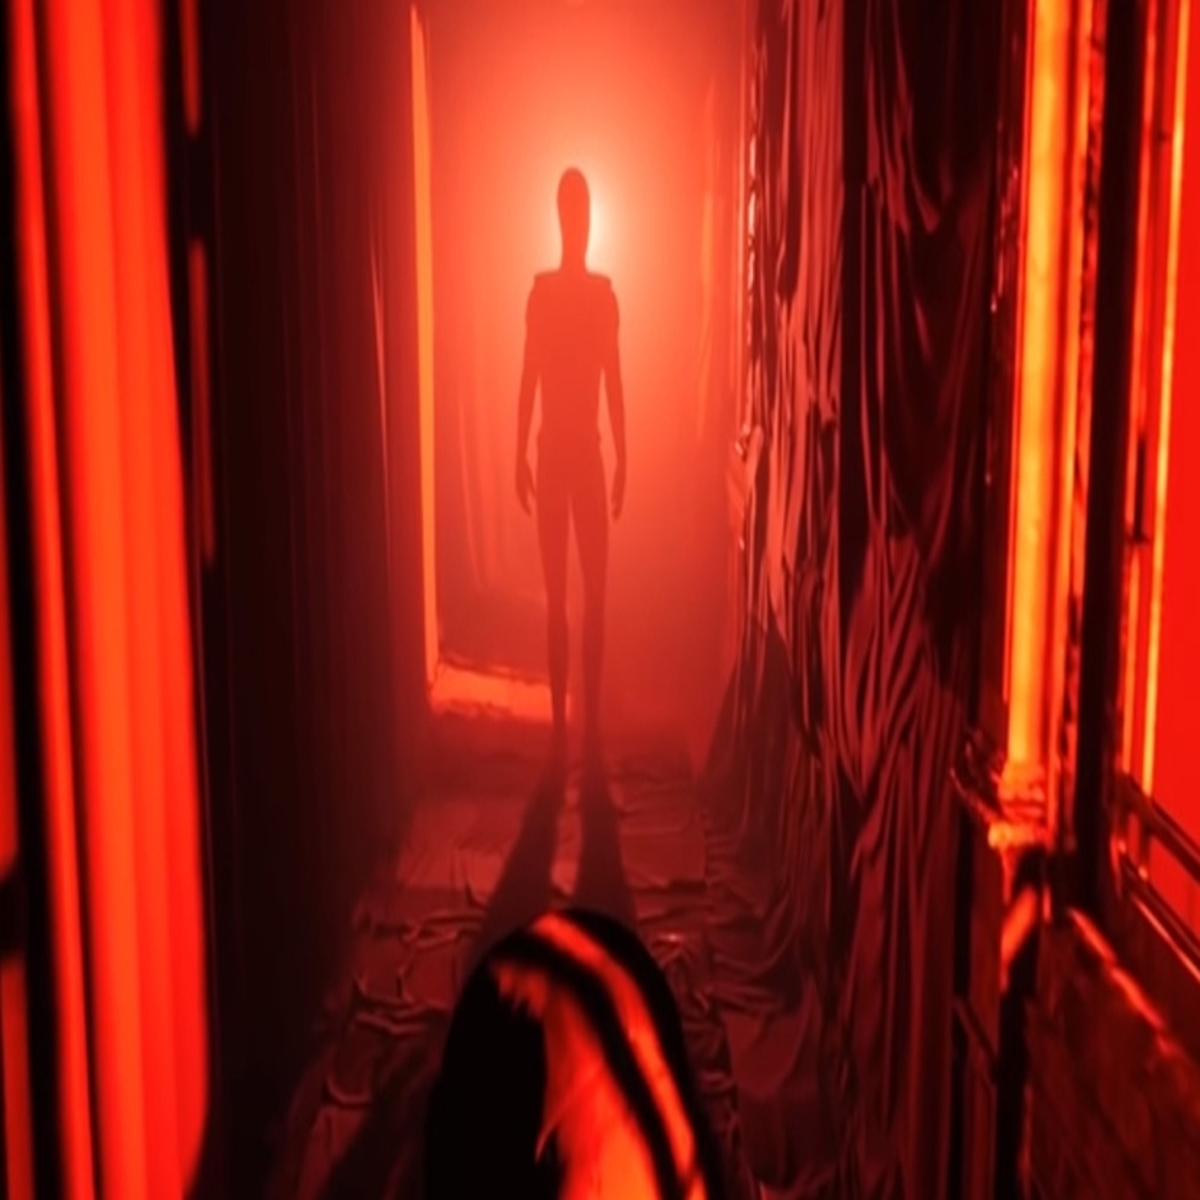 LAYERS OF FEAR 2 Gameplay Walkthrough Demo (New Horror Game 2019